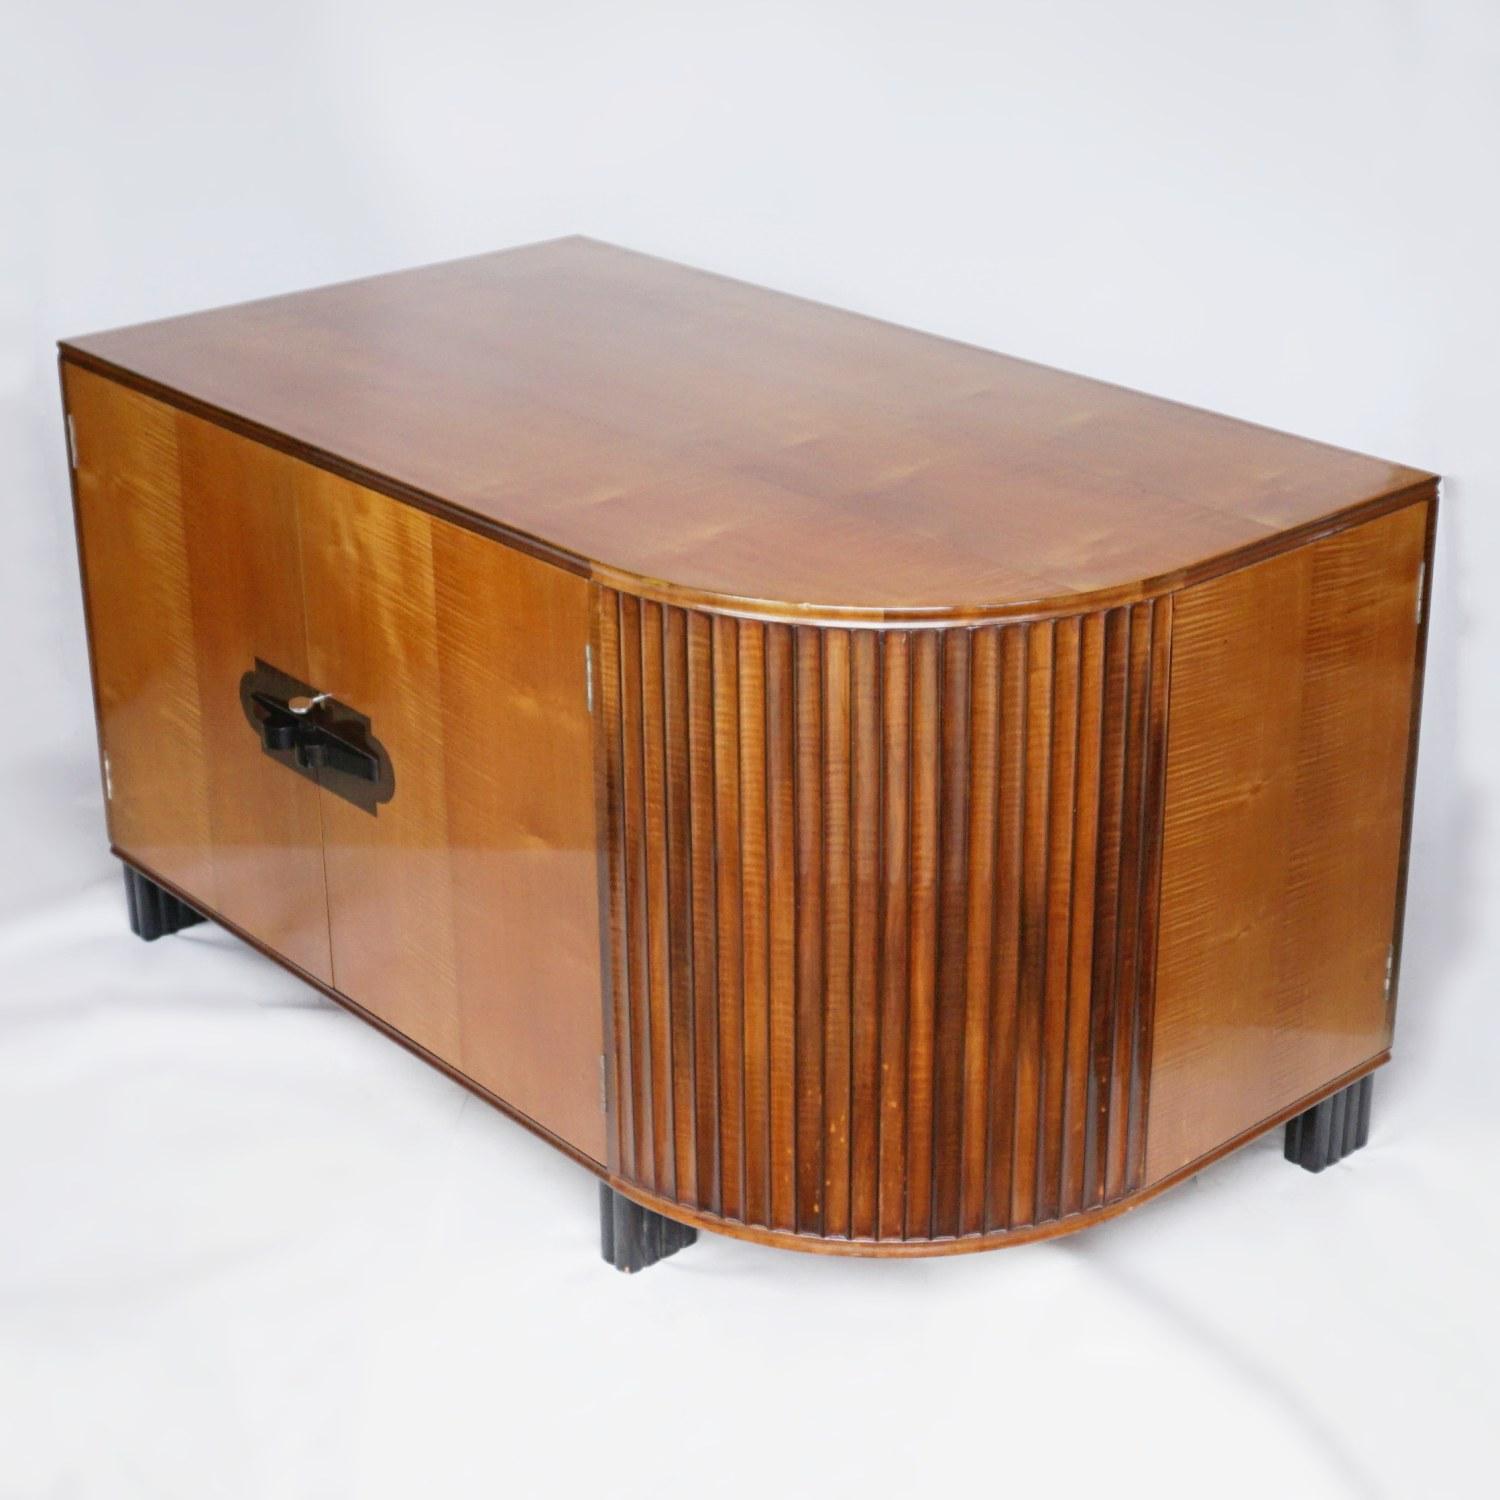 An Art Deco desk by Maurice Adams. Satinwood veneered on solid mahogany with ebonised fluted feet and handles. Front section of five drawers with a shelved cupboard. Large shelved cupboard section to back with a curved tambour feature.